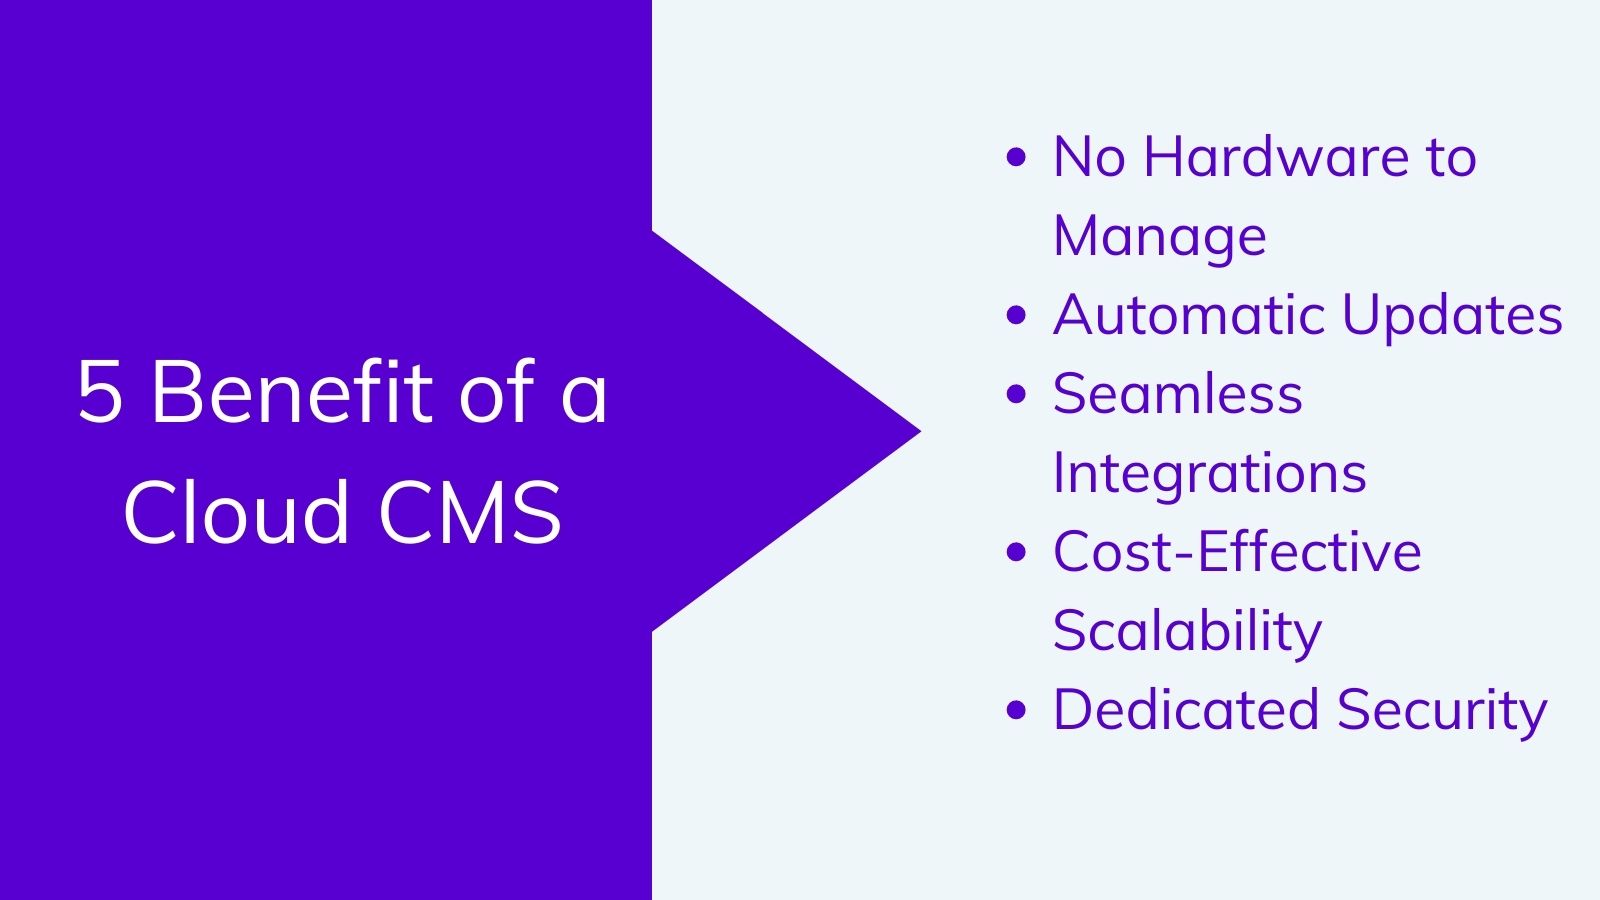 The benefits of a Cloud CMS 